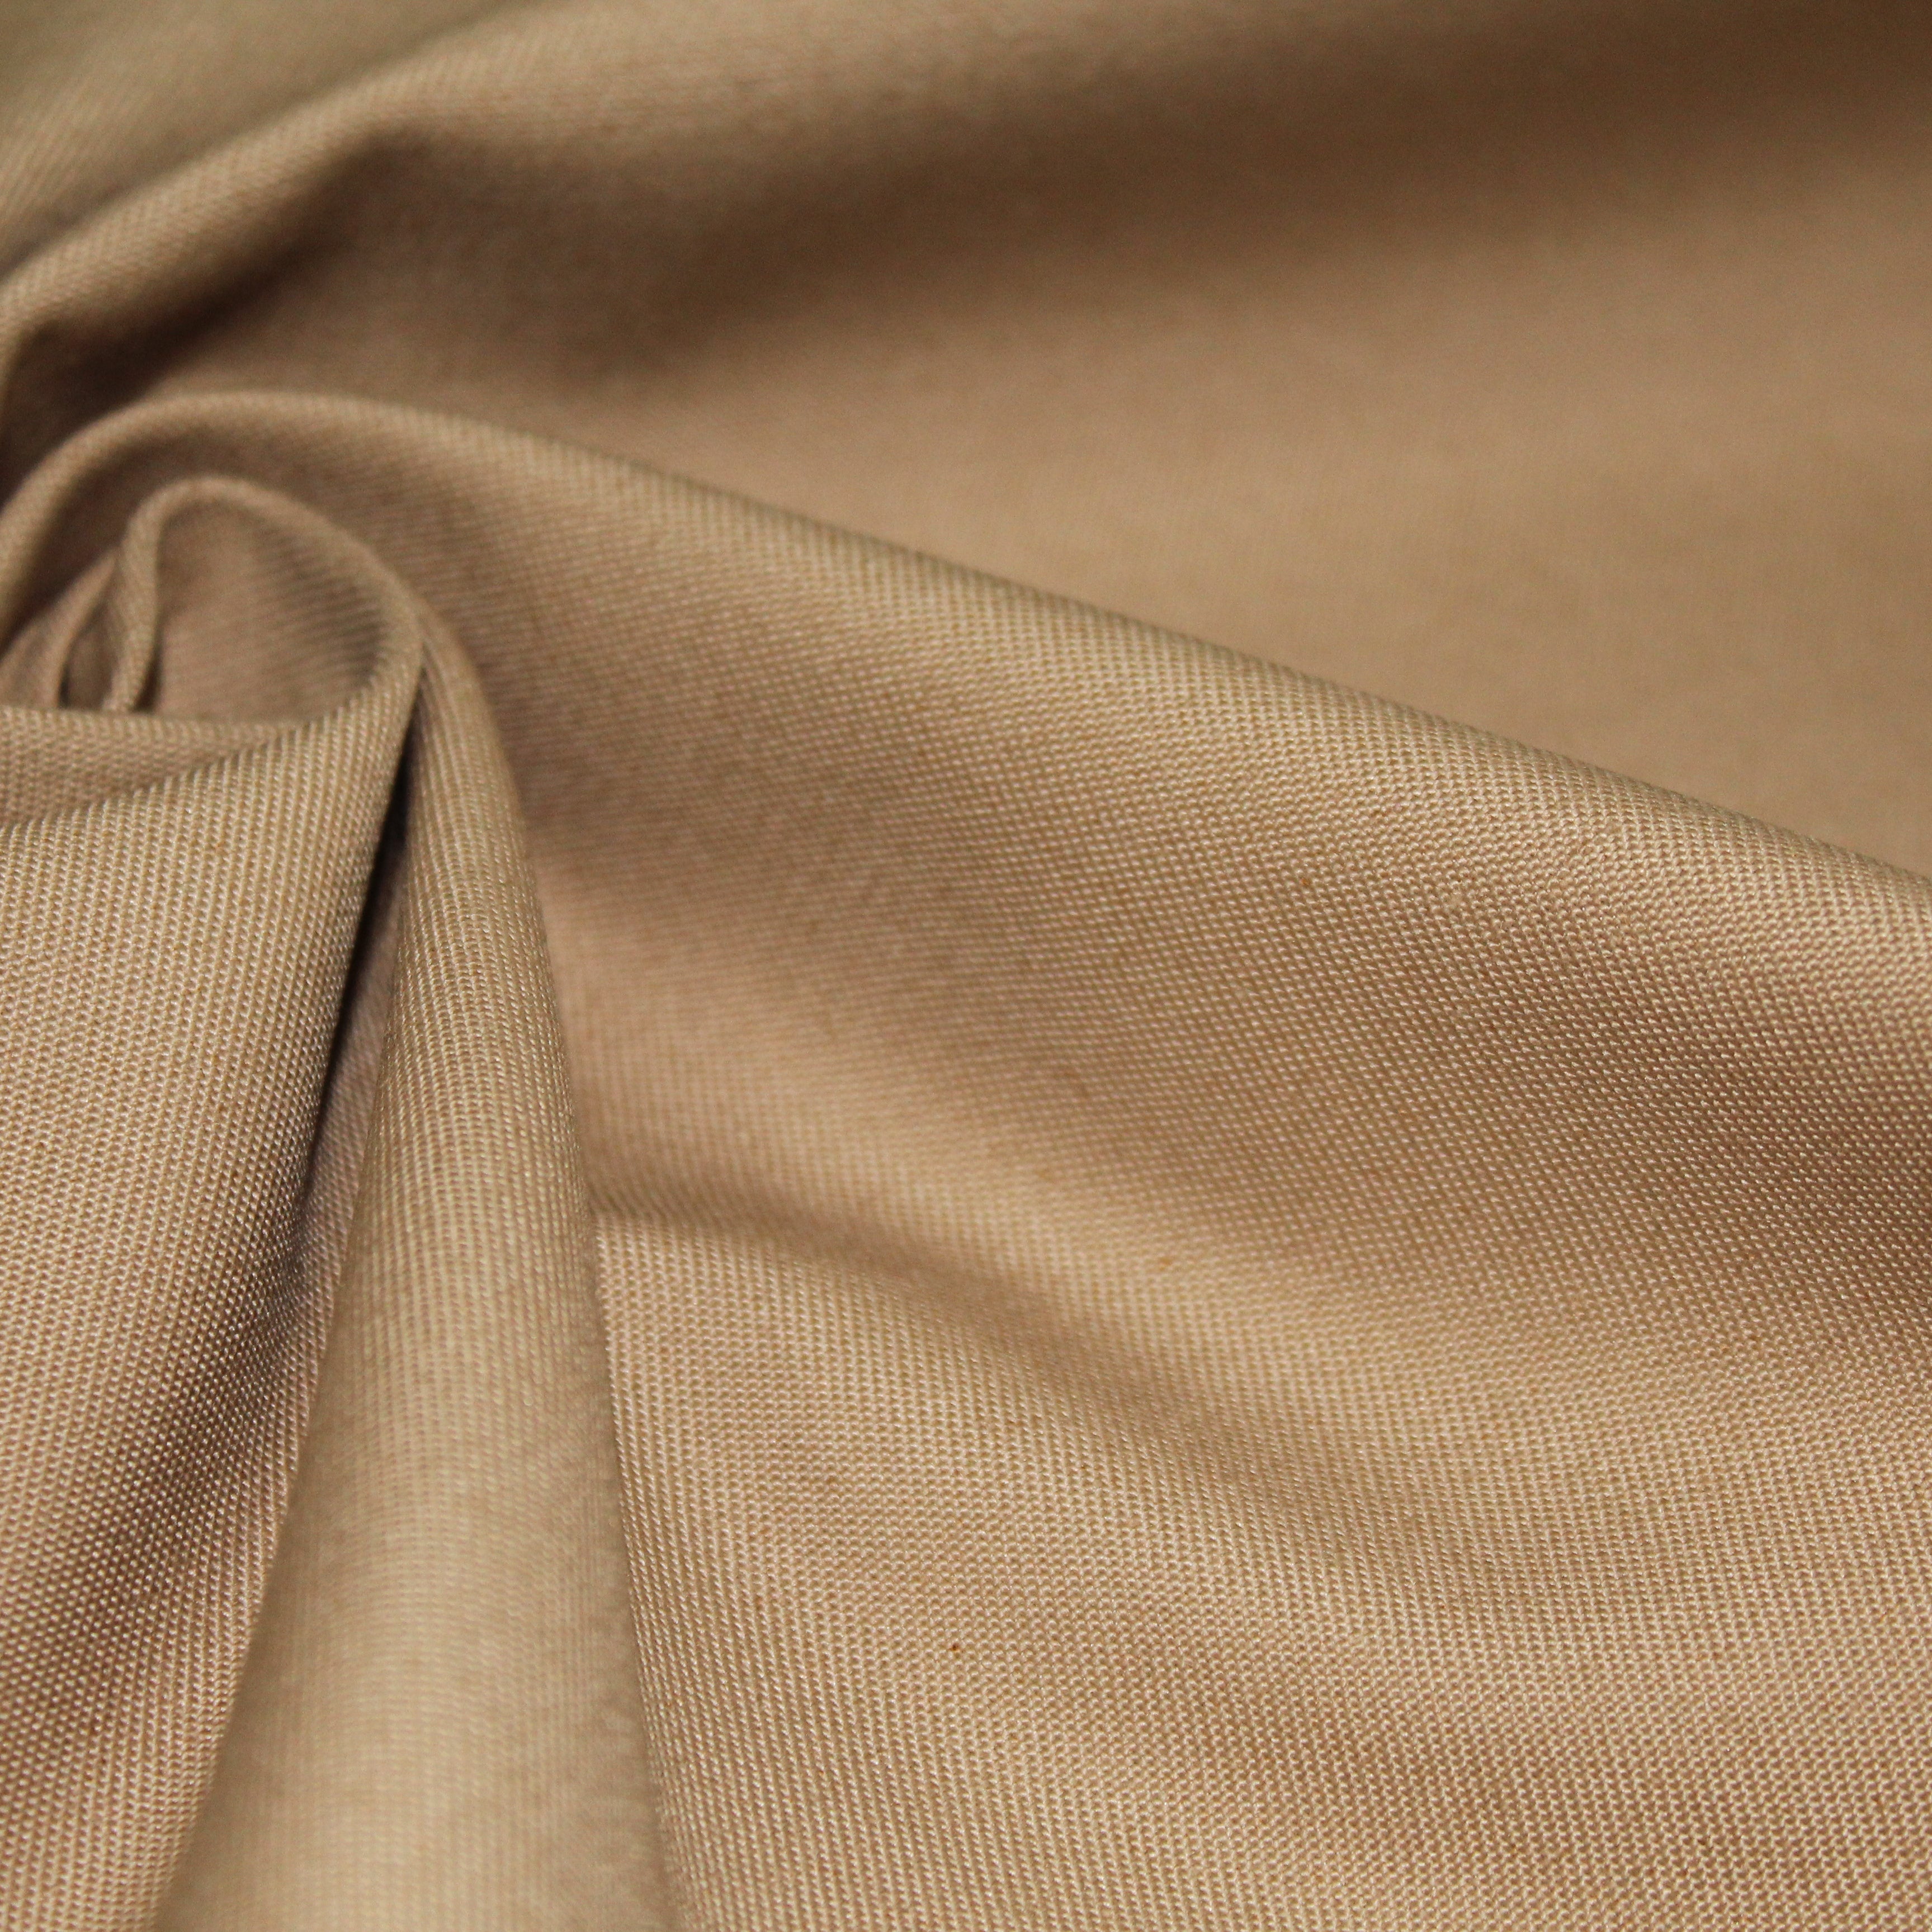 Premium Poly-Cotton Drill Fabric, 60" Wide, Variations Available